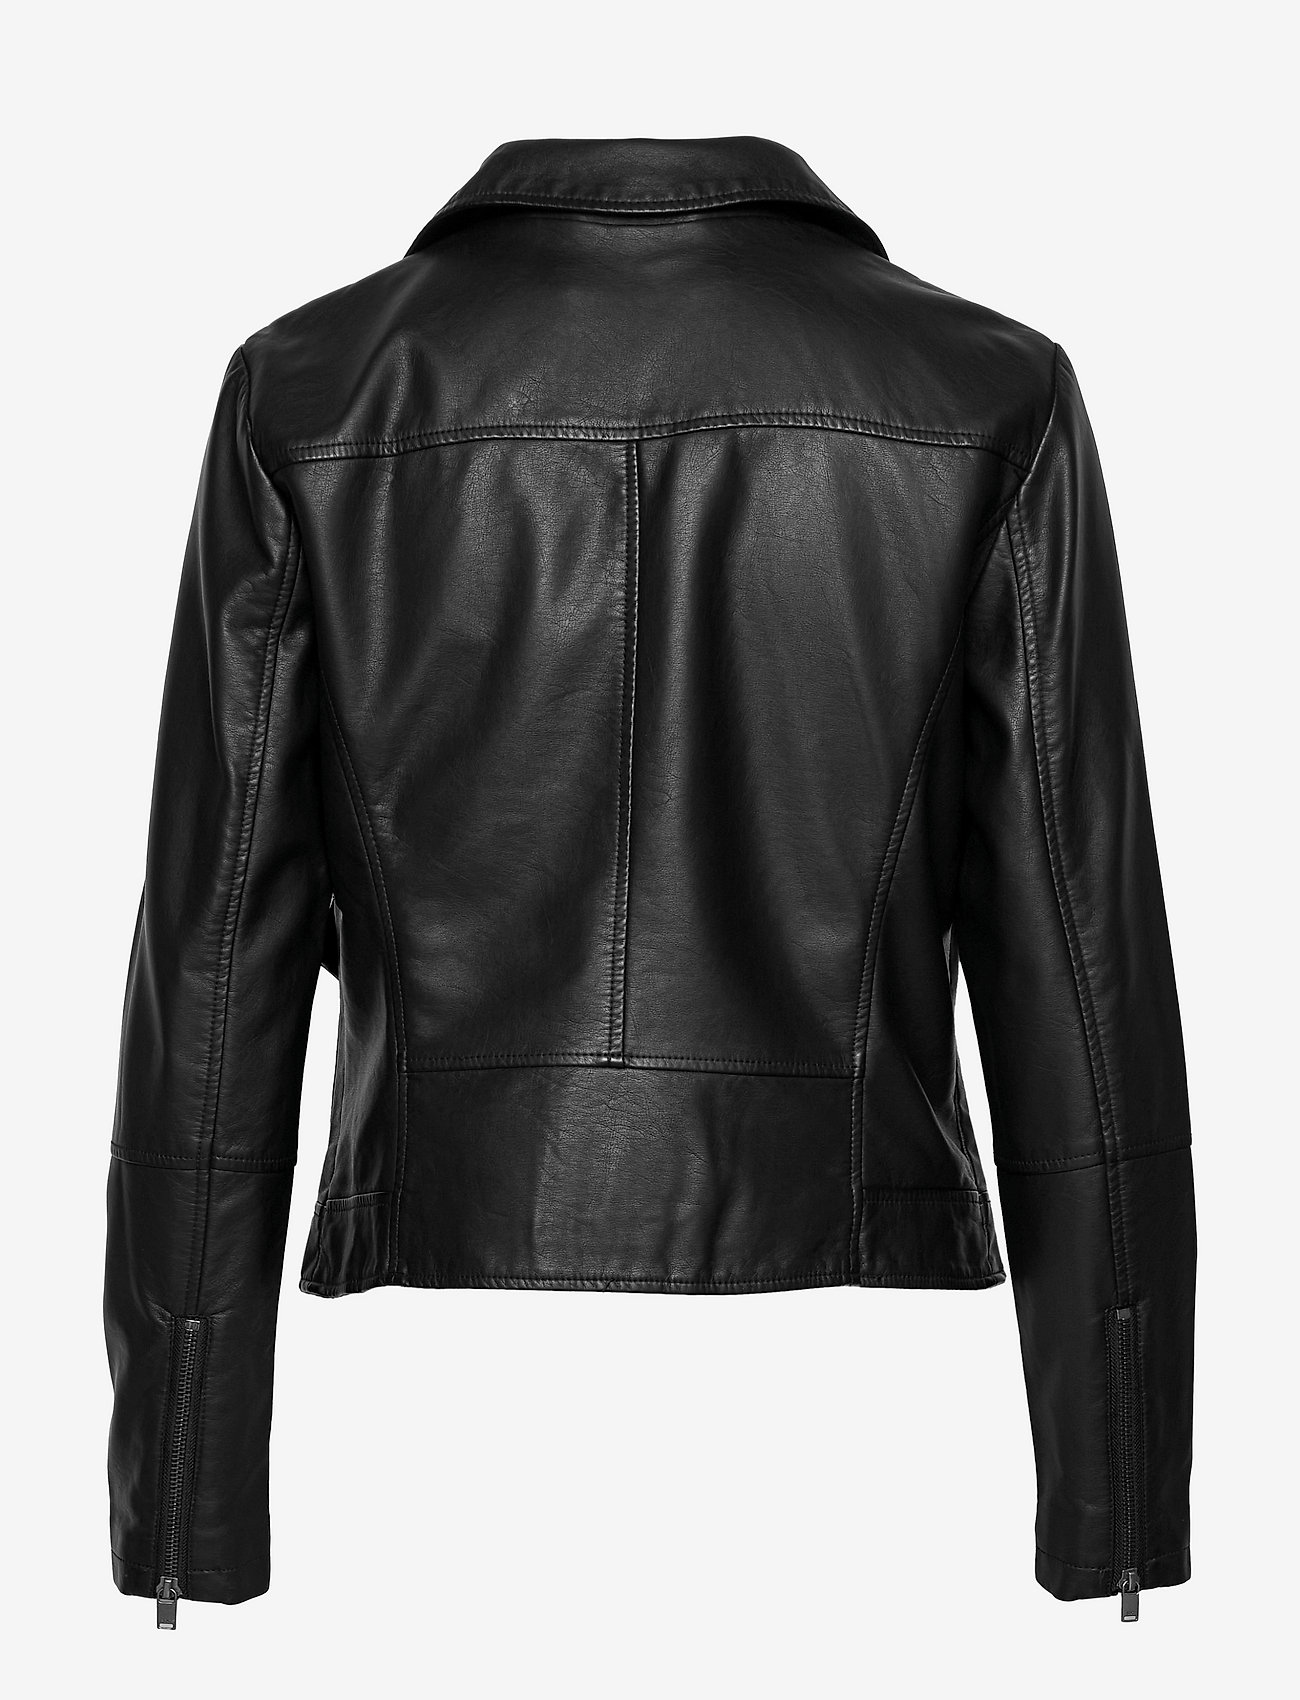 EDC by Esprit Jackets Outdoor Woven - Leather jackets | Boozt.com